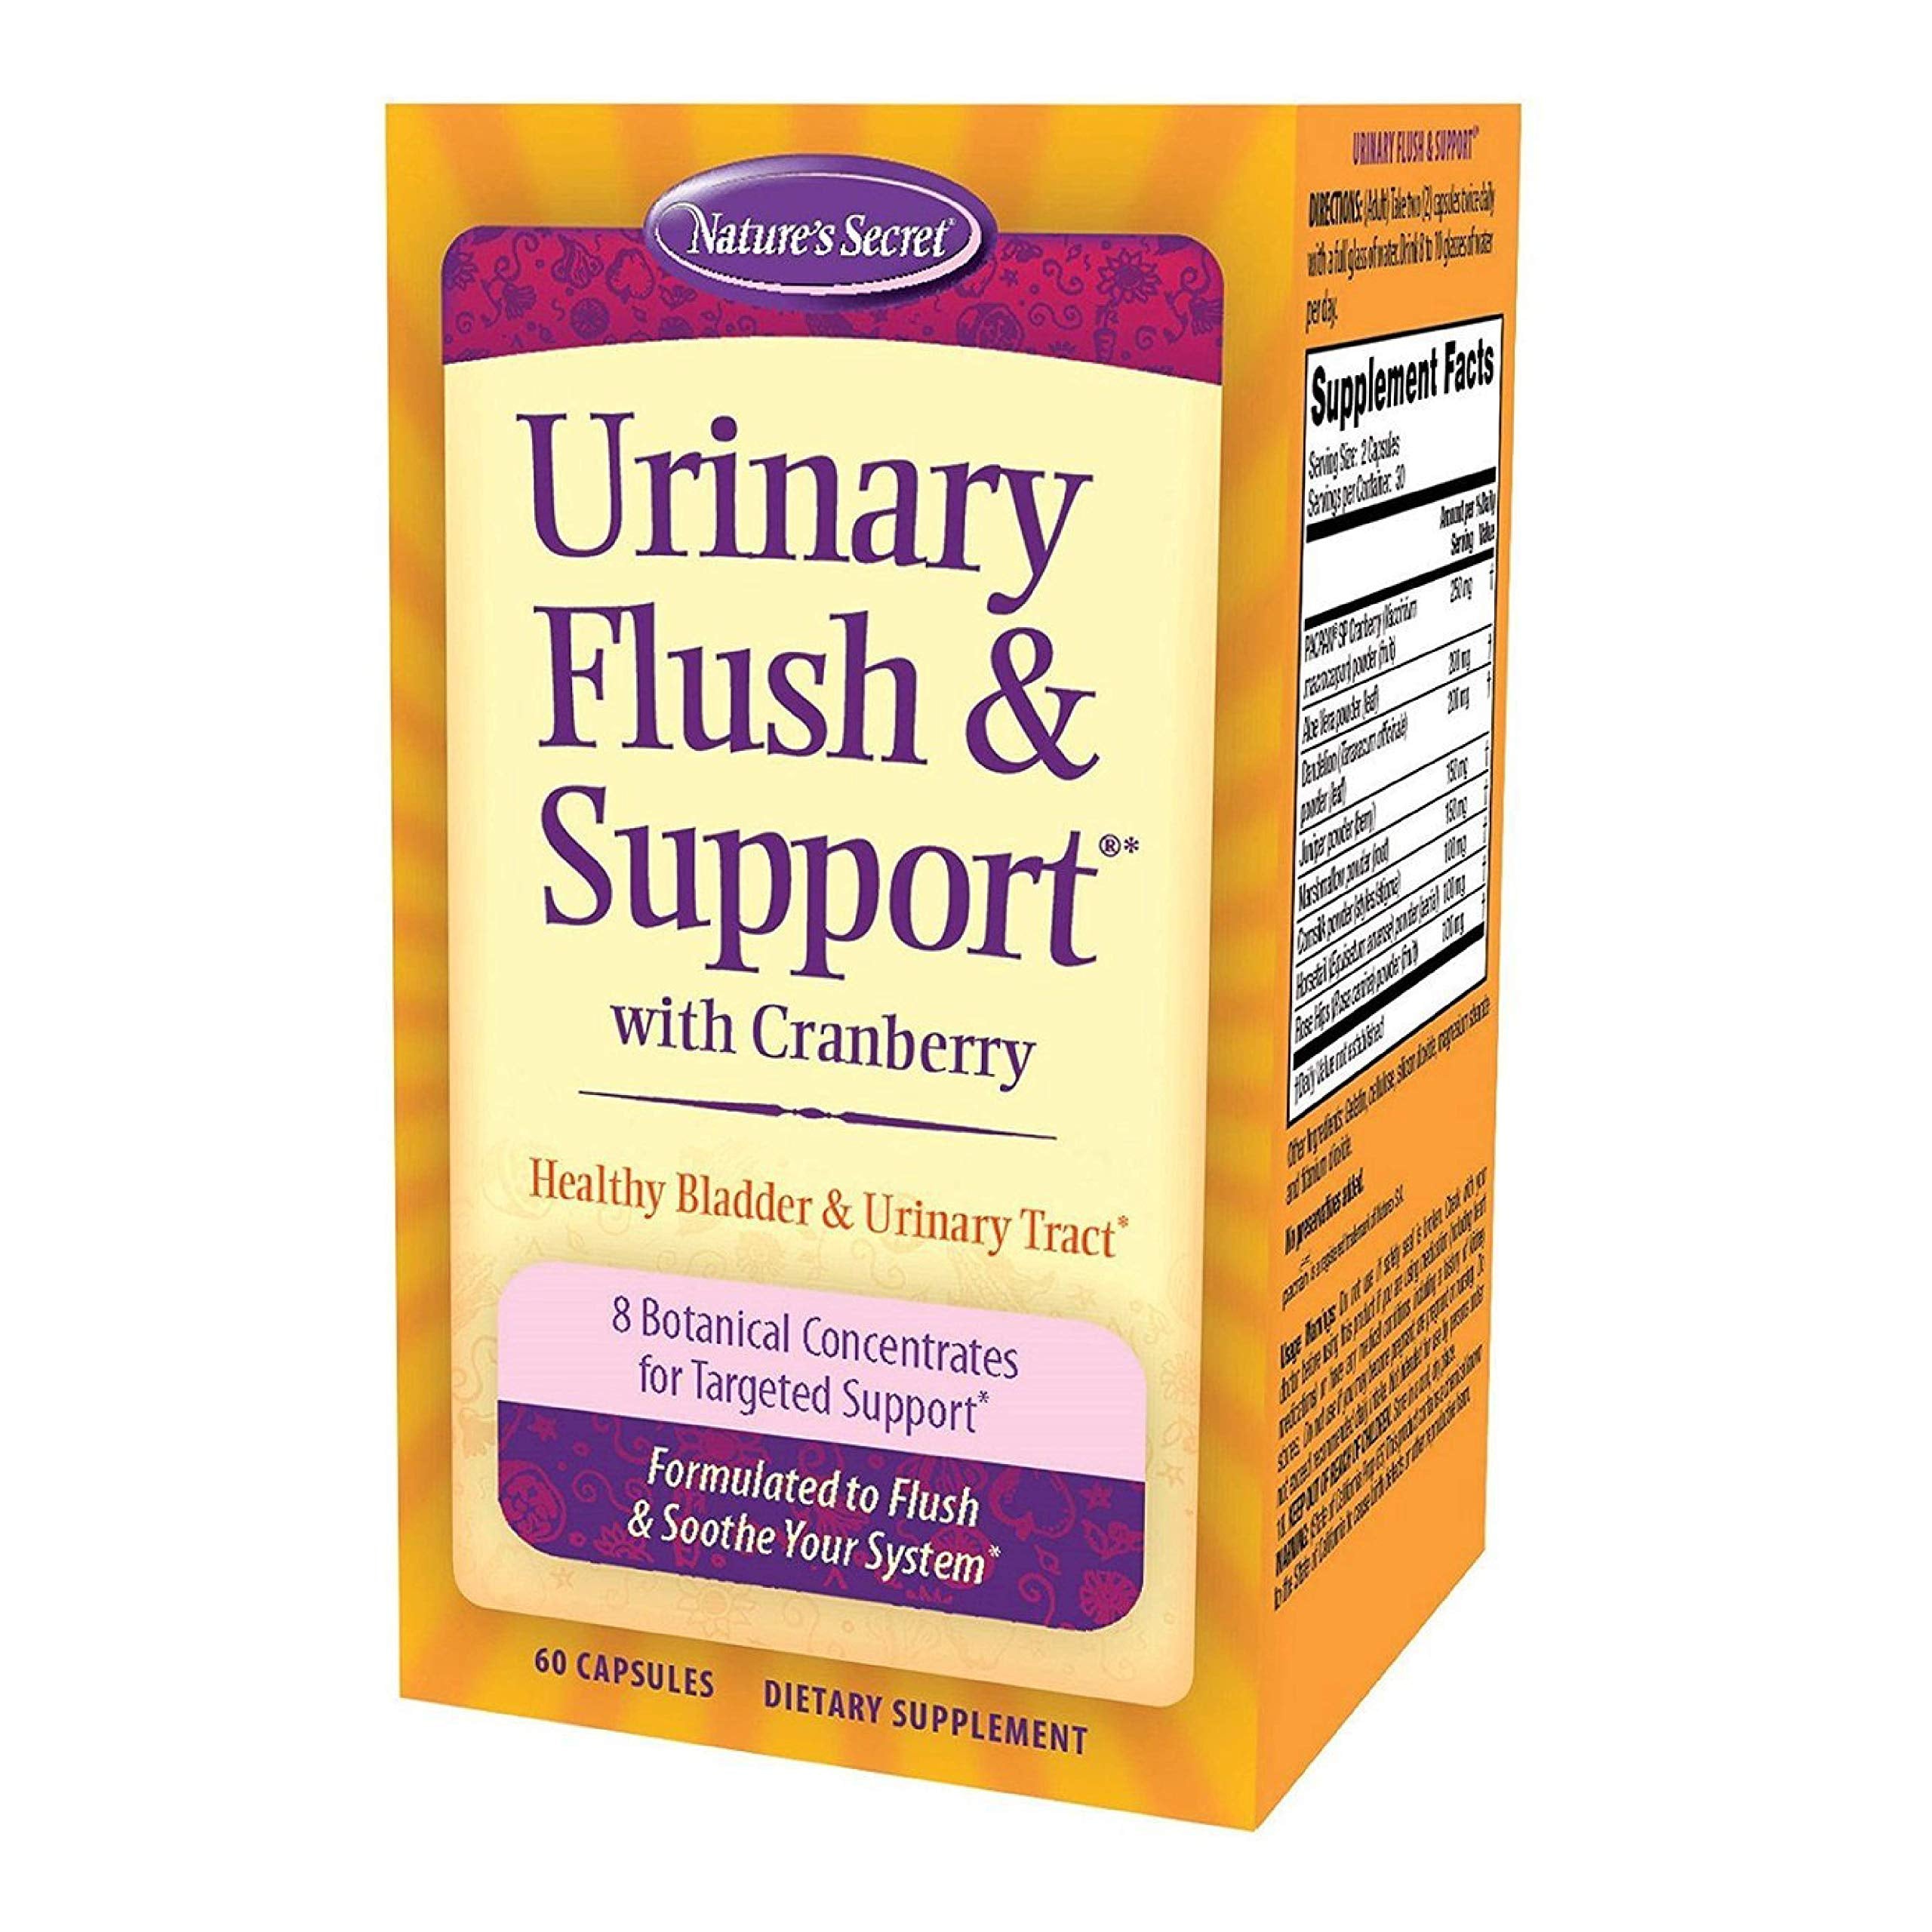 Nature's Secret Urinary Flush & Support Promotes Healthy Bladder & Urinary Tract - 60 Capsules